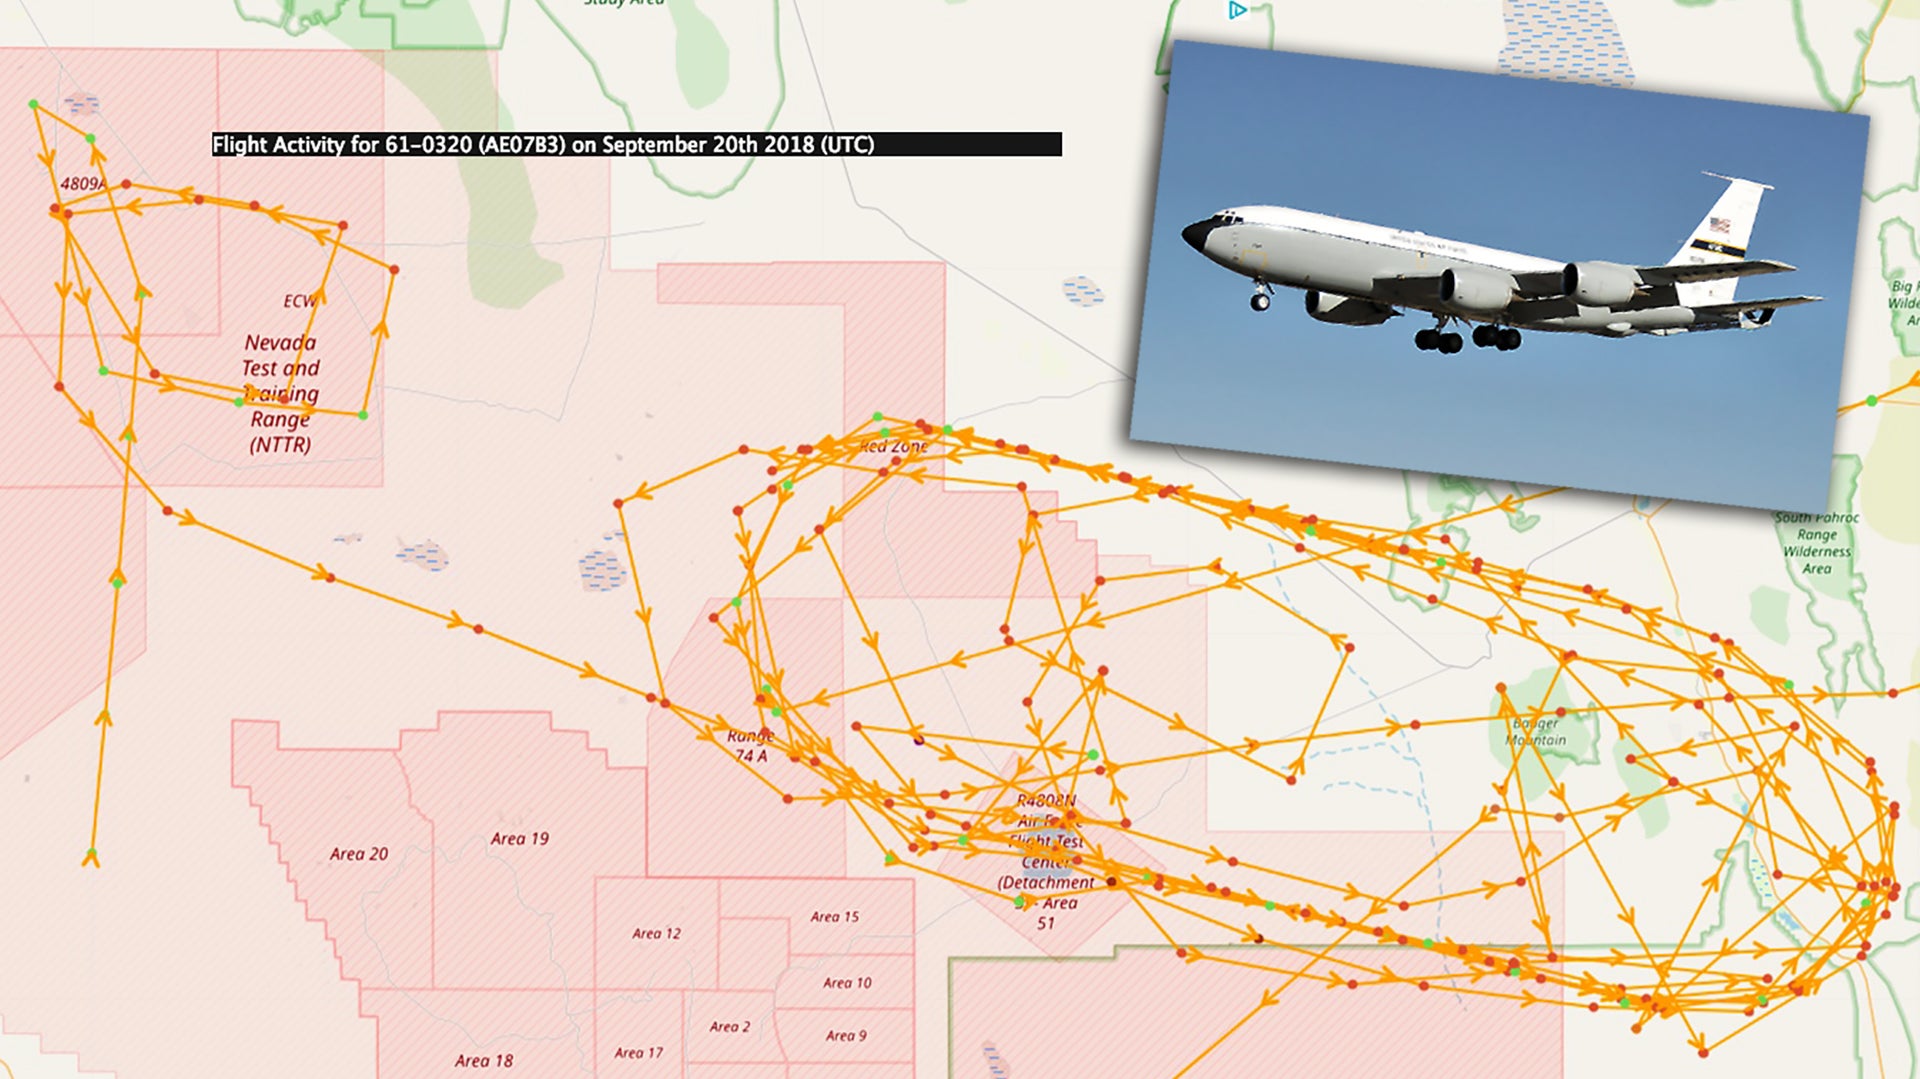 NKC-135R Tanker From Edwards AFB Flew This Peculiar Night Mission Over Area 51